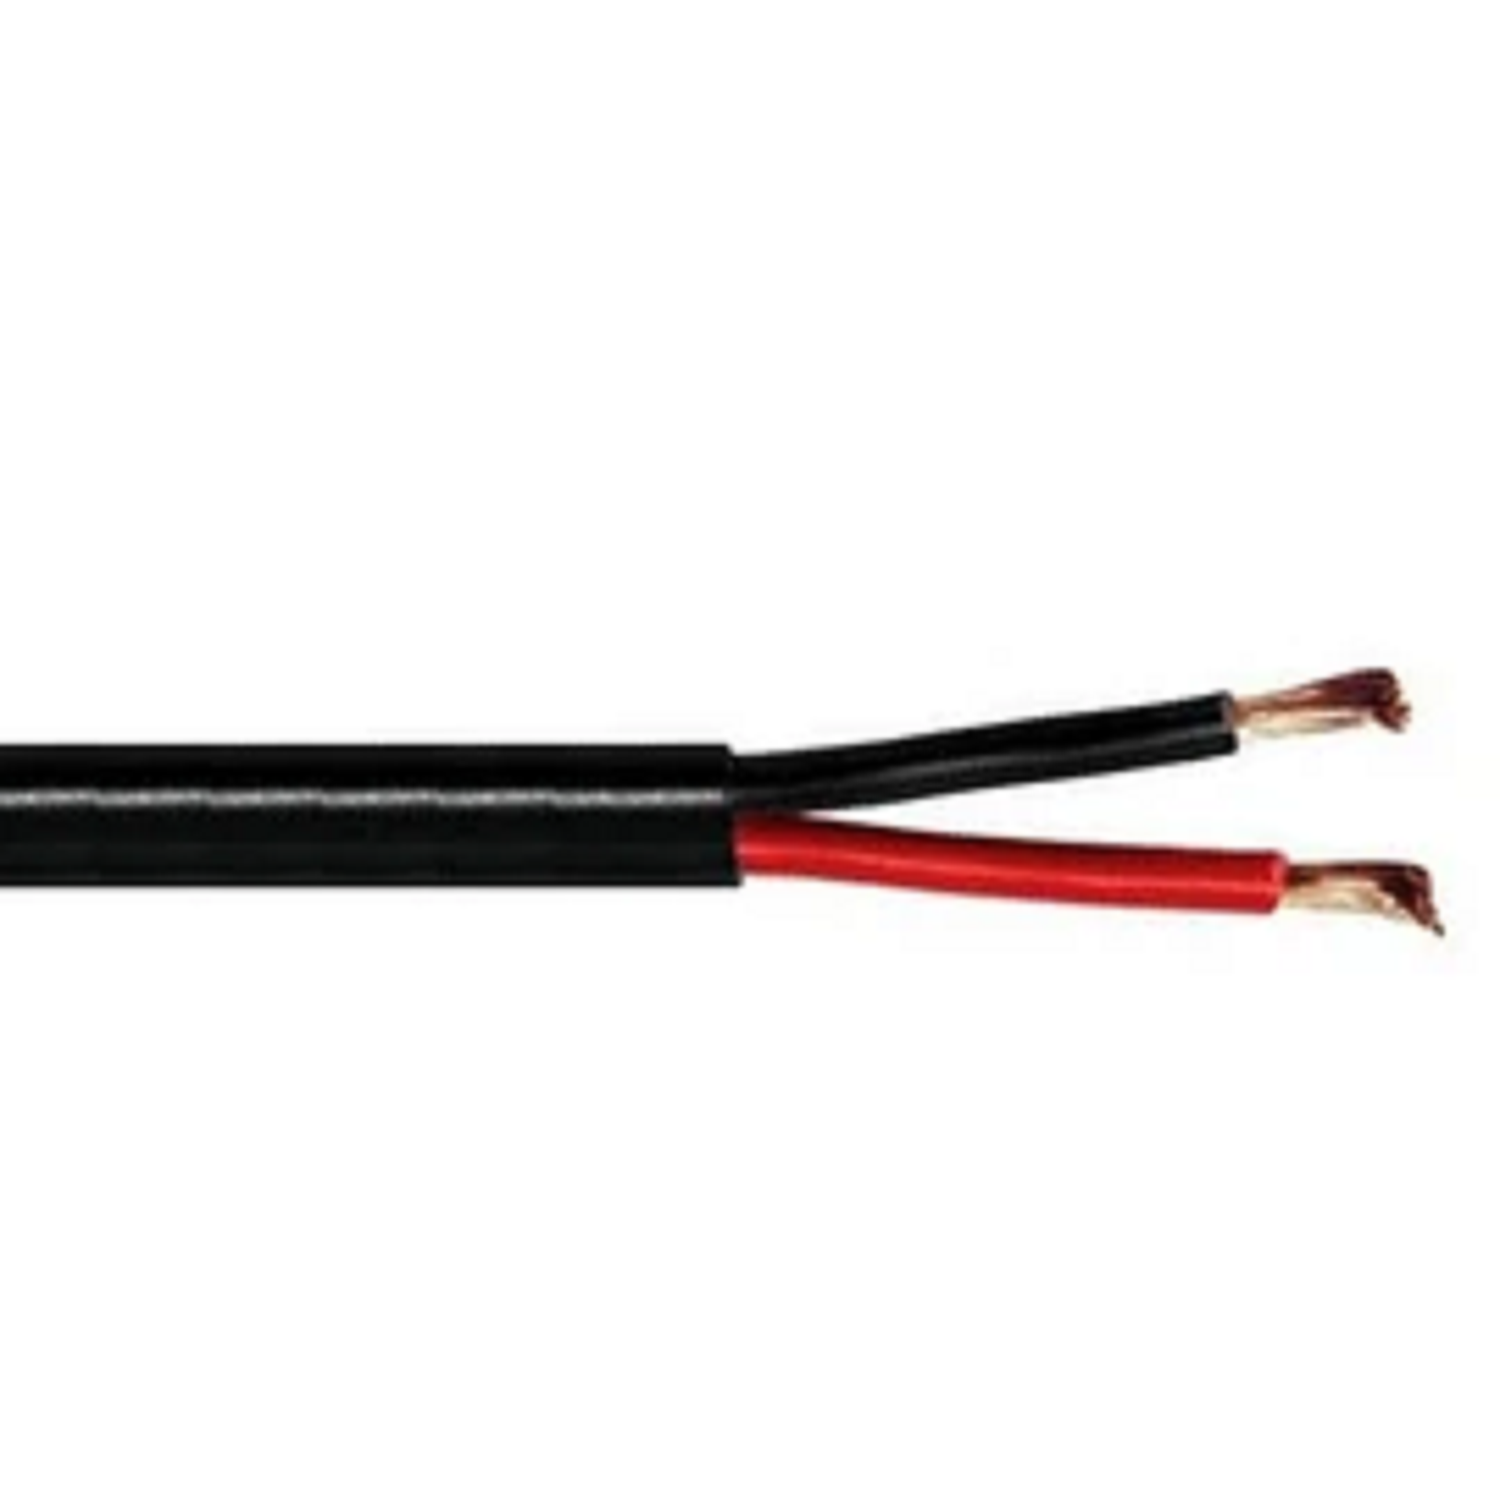 35 Sqmm Polycab Copper Flexible Cable (11 KV) With PVC Insulated Sheathed - Black